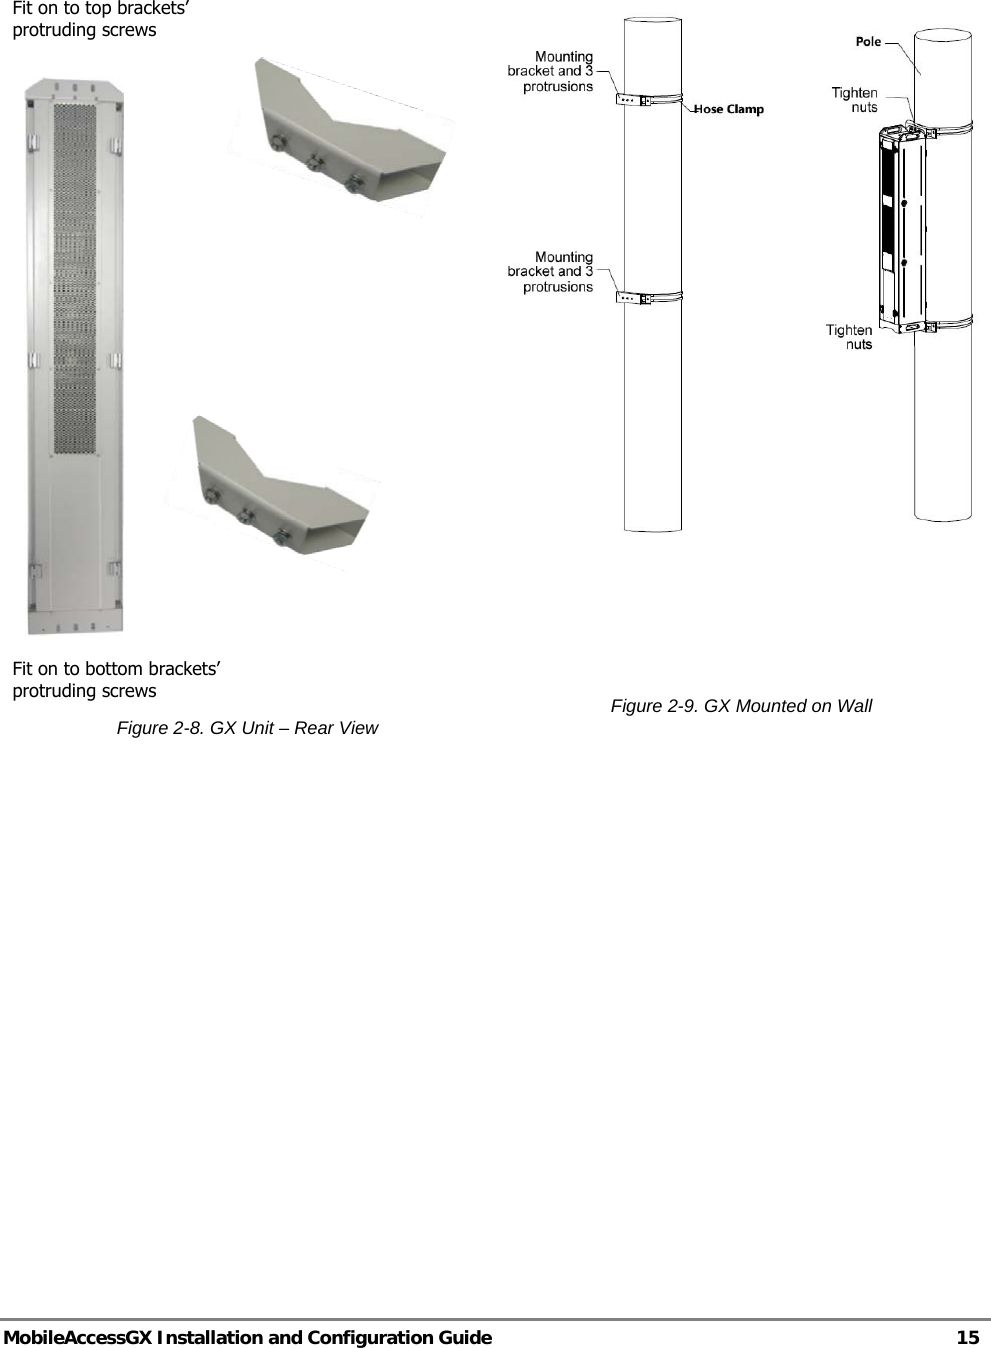   MobileAccessGX Installation and Configuration Guide   15       Figure 2-8. GX Unit – Rear View     Figure 2-9. GX Mounted on Wall       Fit on to top brackets’ protruding screws Fit on to bottom brackets’ protruding screws 